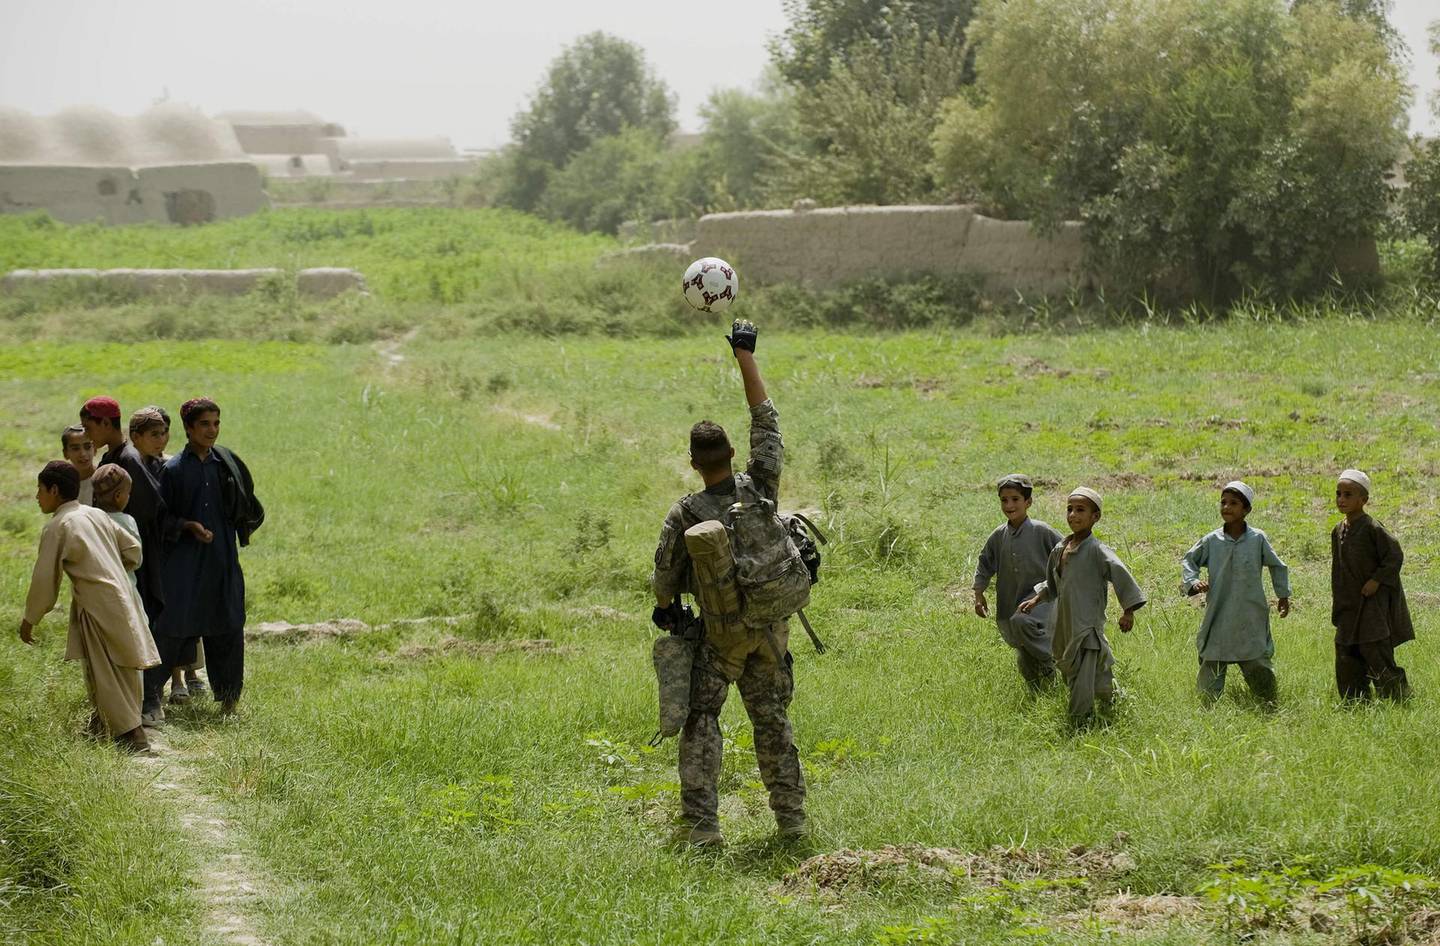 (FILES) In this file photo a US soldier (C) from 1st Platoon Bravo Troop of 1st Squadron, 71st Cavalry plays with a soccer ball with Afghan children during a patrol in Dand district of Kandahar Province in Afghanistan on July 24, 2010.   US President Joe Biden will formally announce on April 14, 2021 the withdrawal of all US troops from Afghanistan before this year's 20th anniversary of the September 11 attacks, finally ending America's longest war despite mounting fears of a Taliban victory, officials said. The drawdown delays only by around five months an agreement with the Taliban by former president Donald Trump to pull troops, amid a growing consensus in Washington that little more can be achieved.
 / AFP / MANPREET ROMANA
